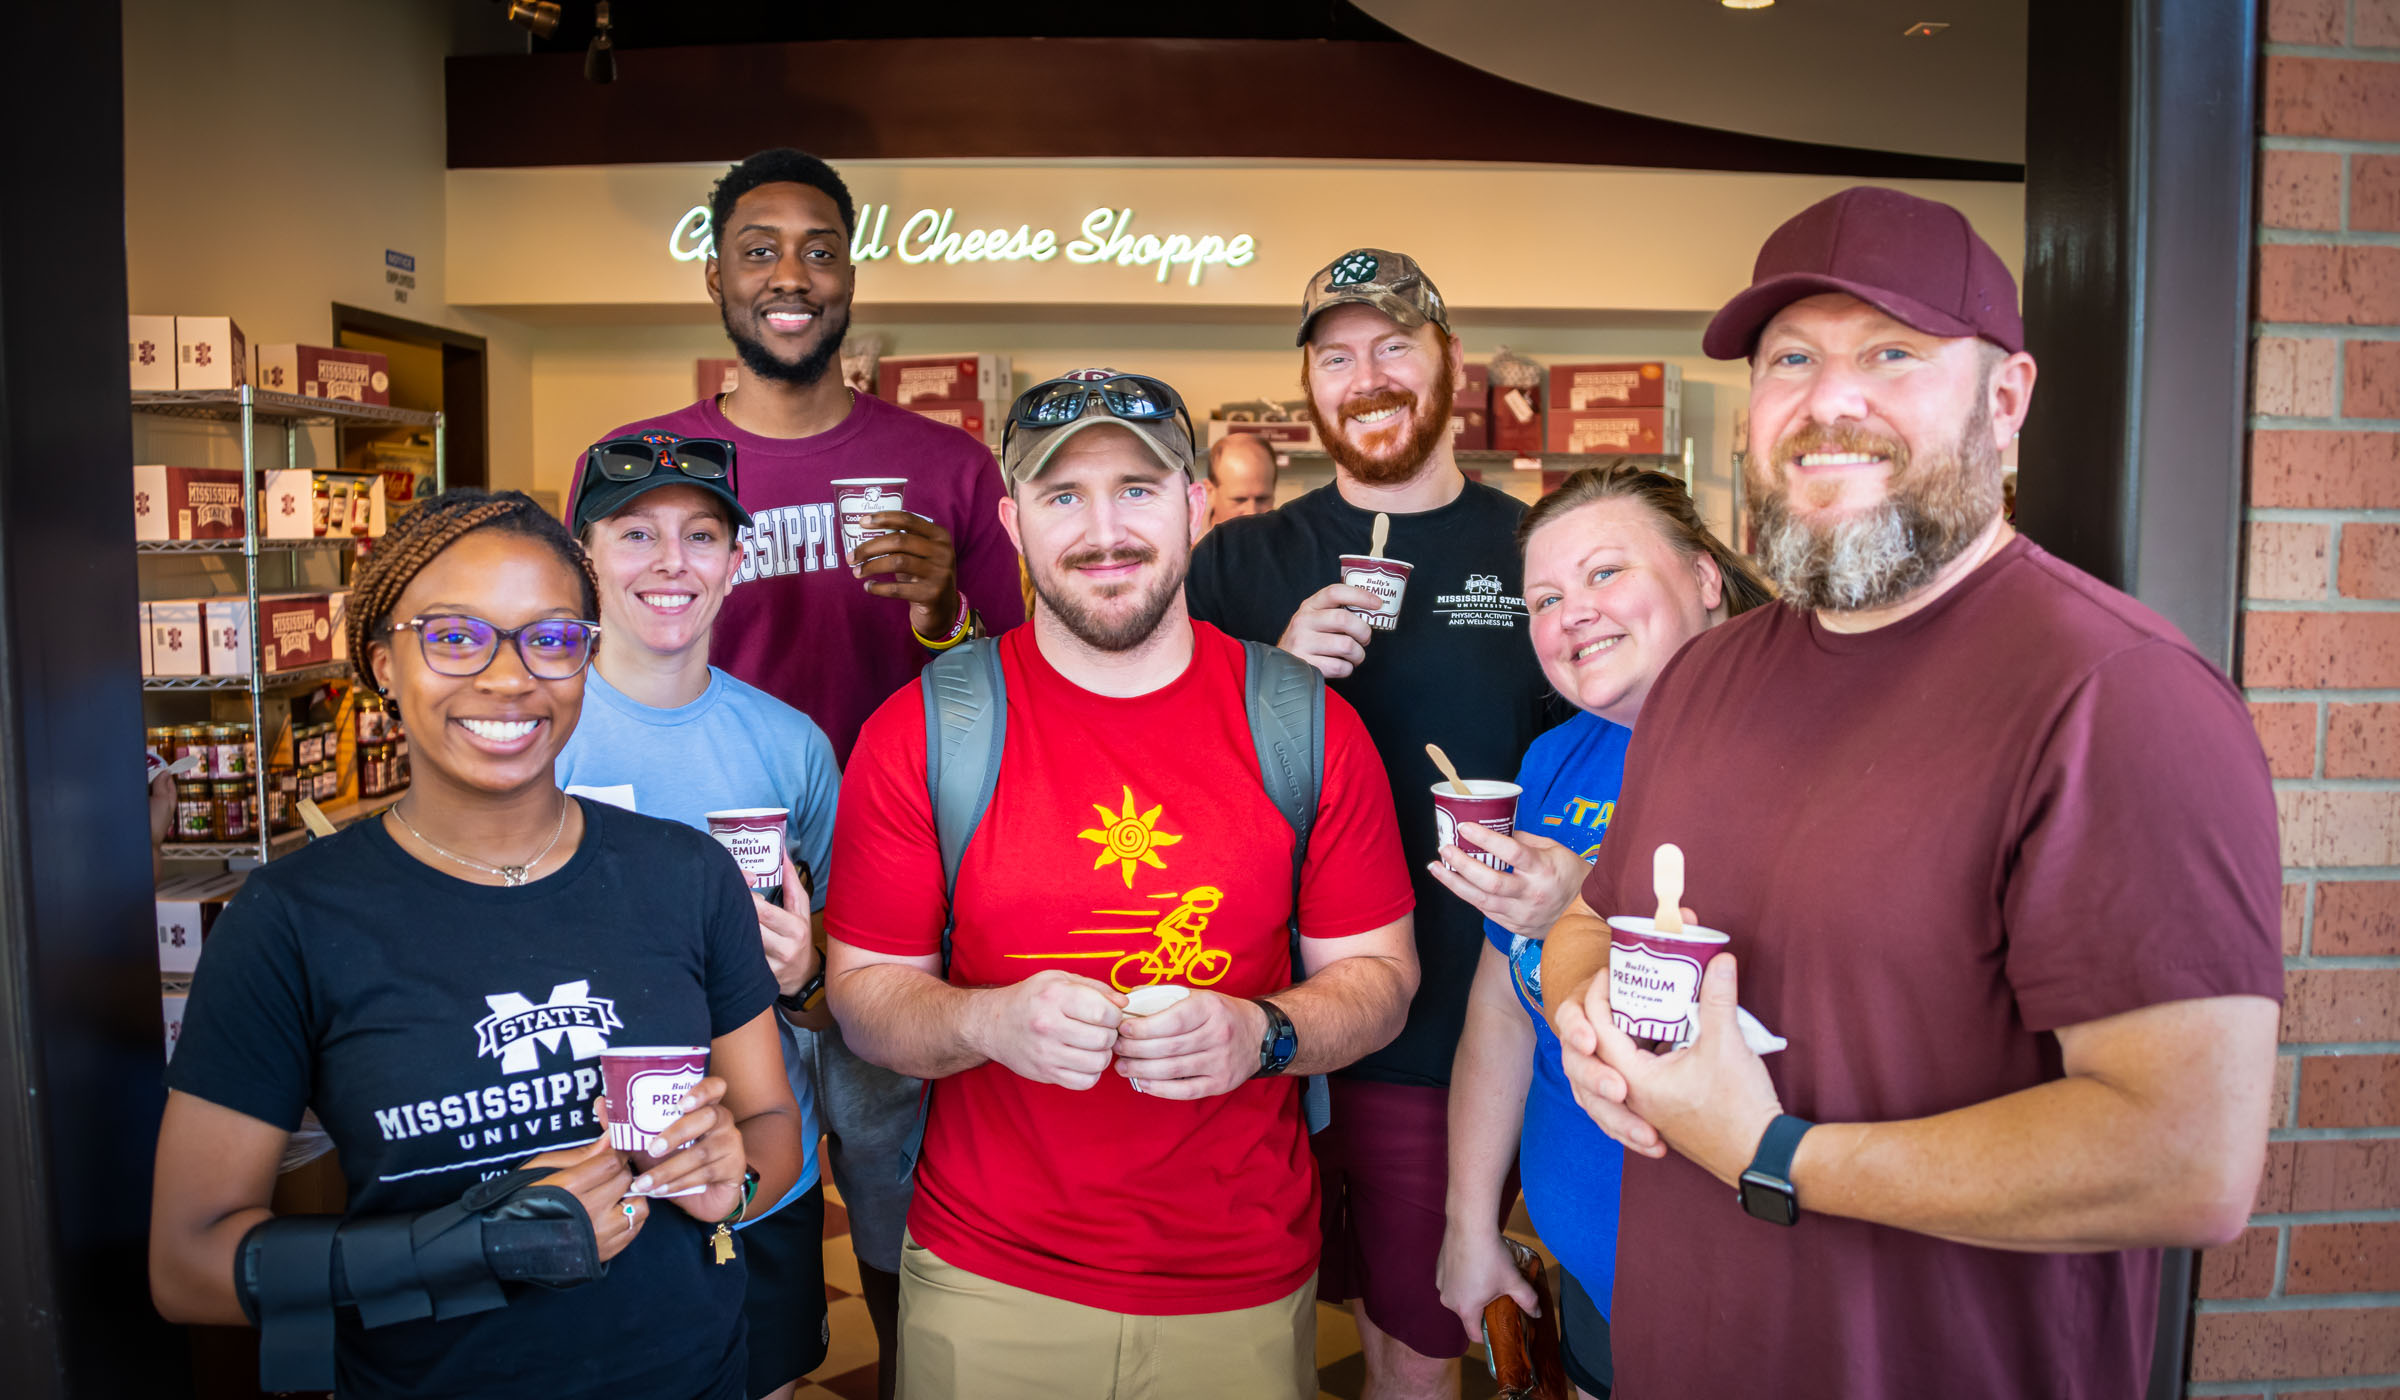 A group of seven MSU employees stand smiling in the door of the MSU Cheese Shop, holding MSU ice cream.